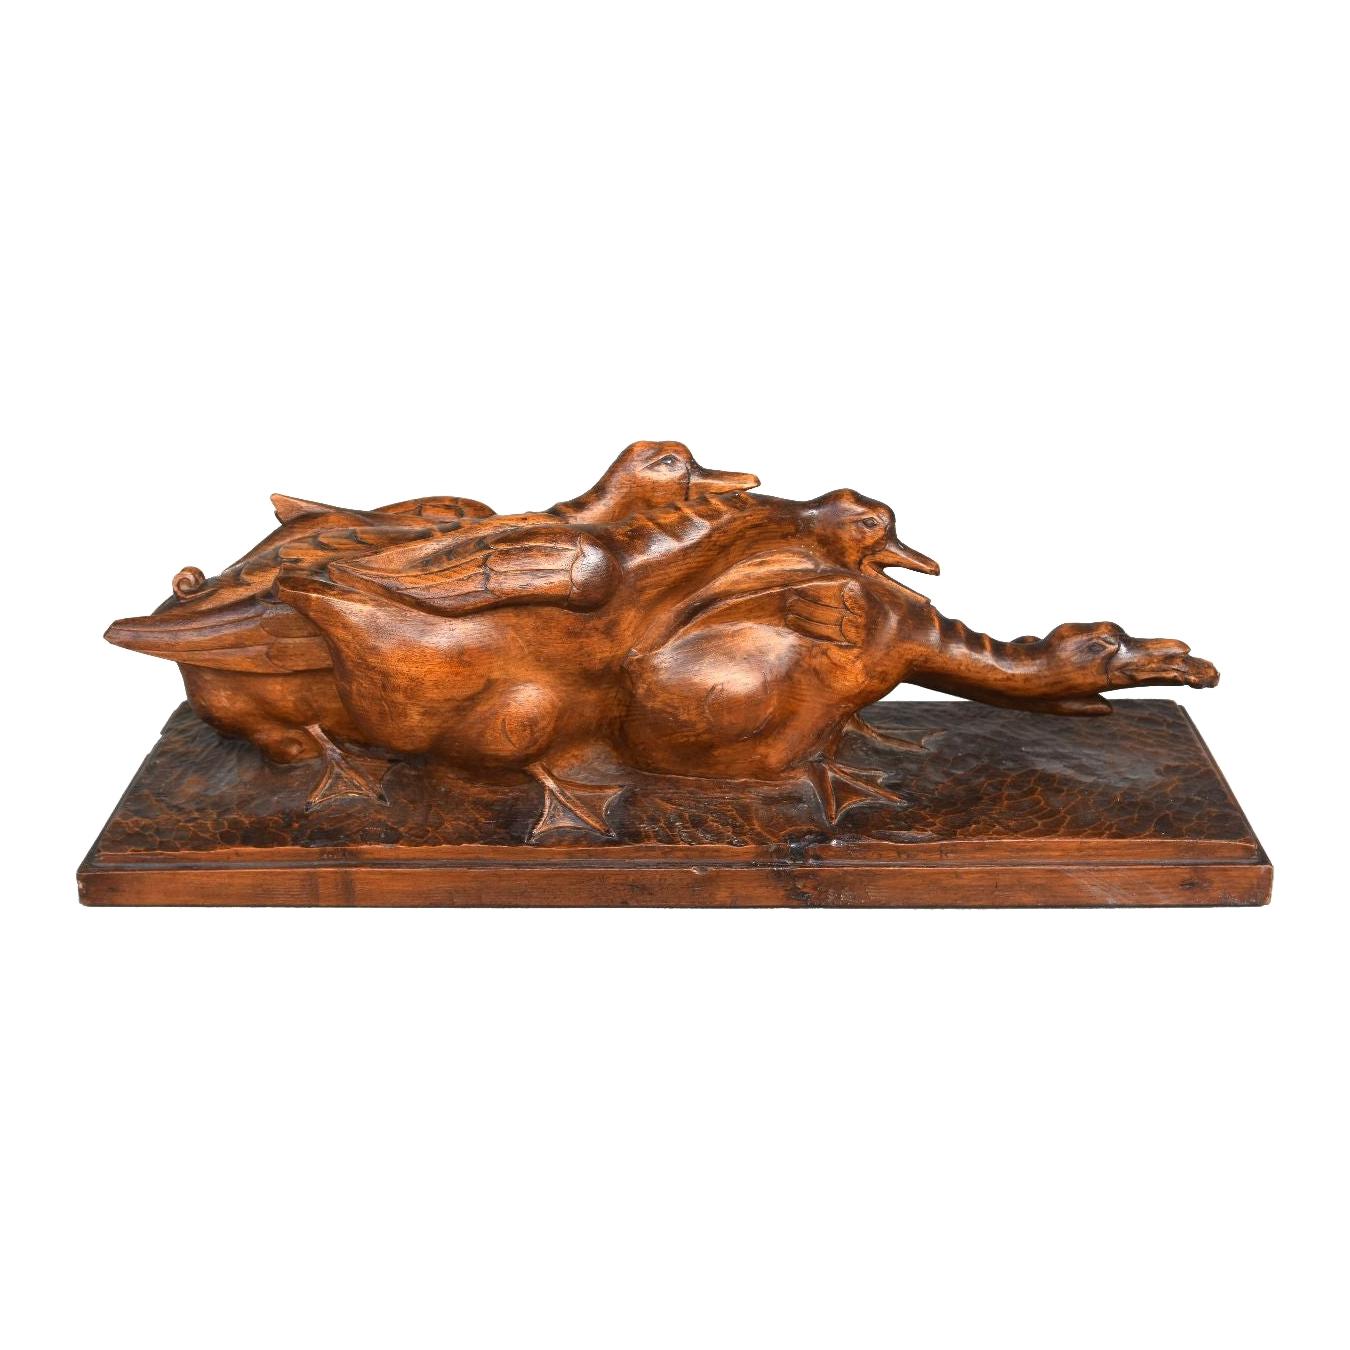 1930 Geese Fighting Over a Frog by H. Petrilly Art Deco Wooden Sculpture For Sale